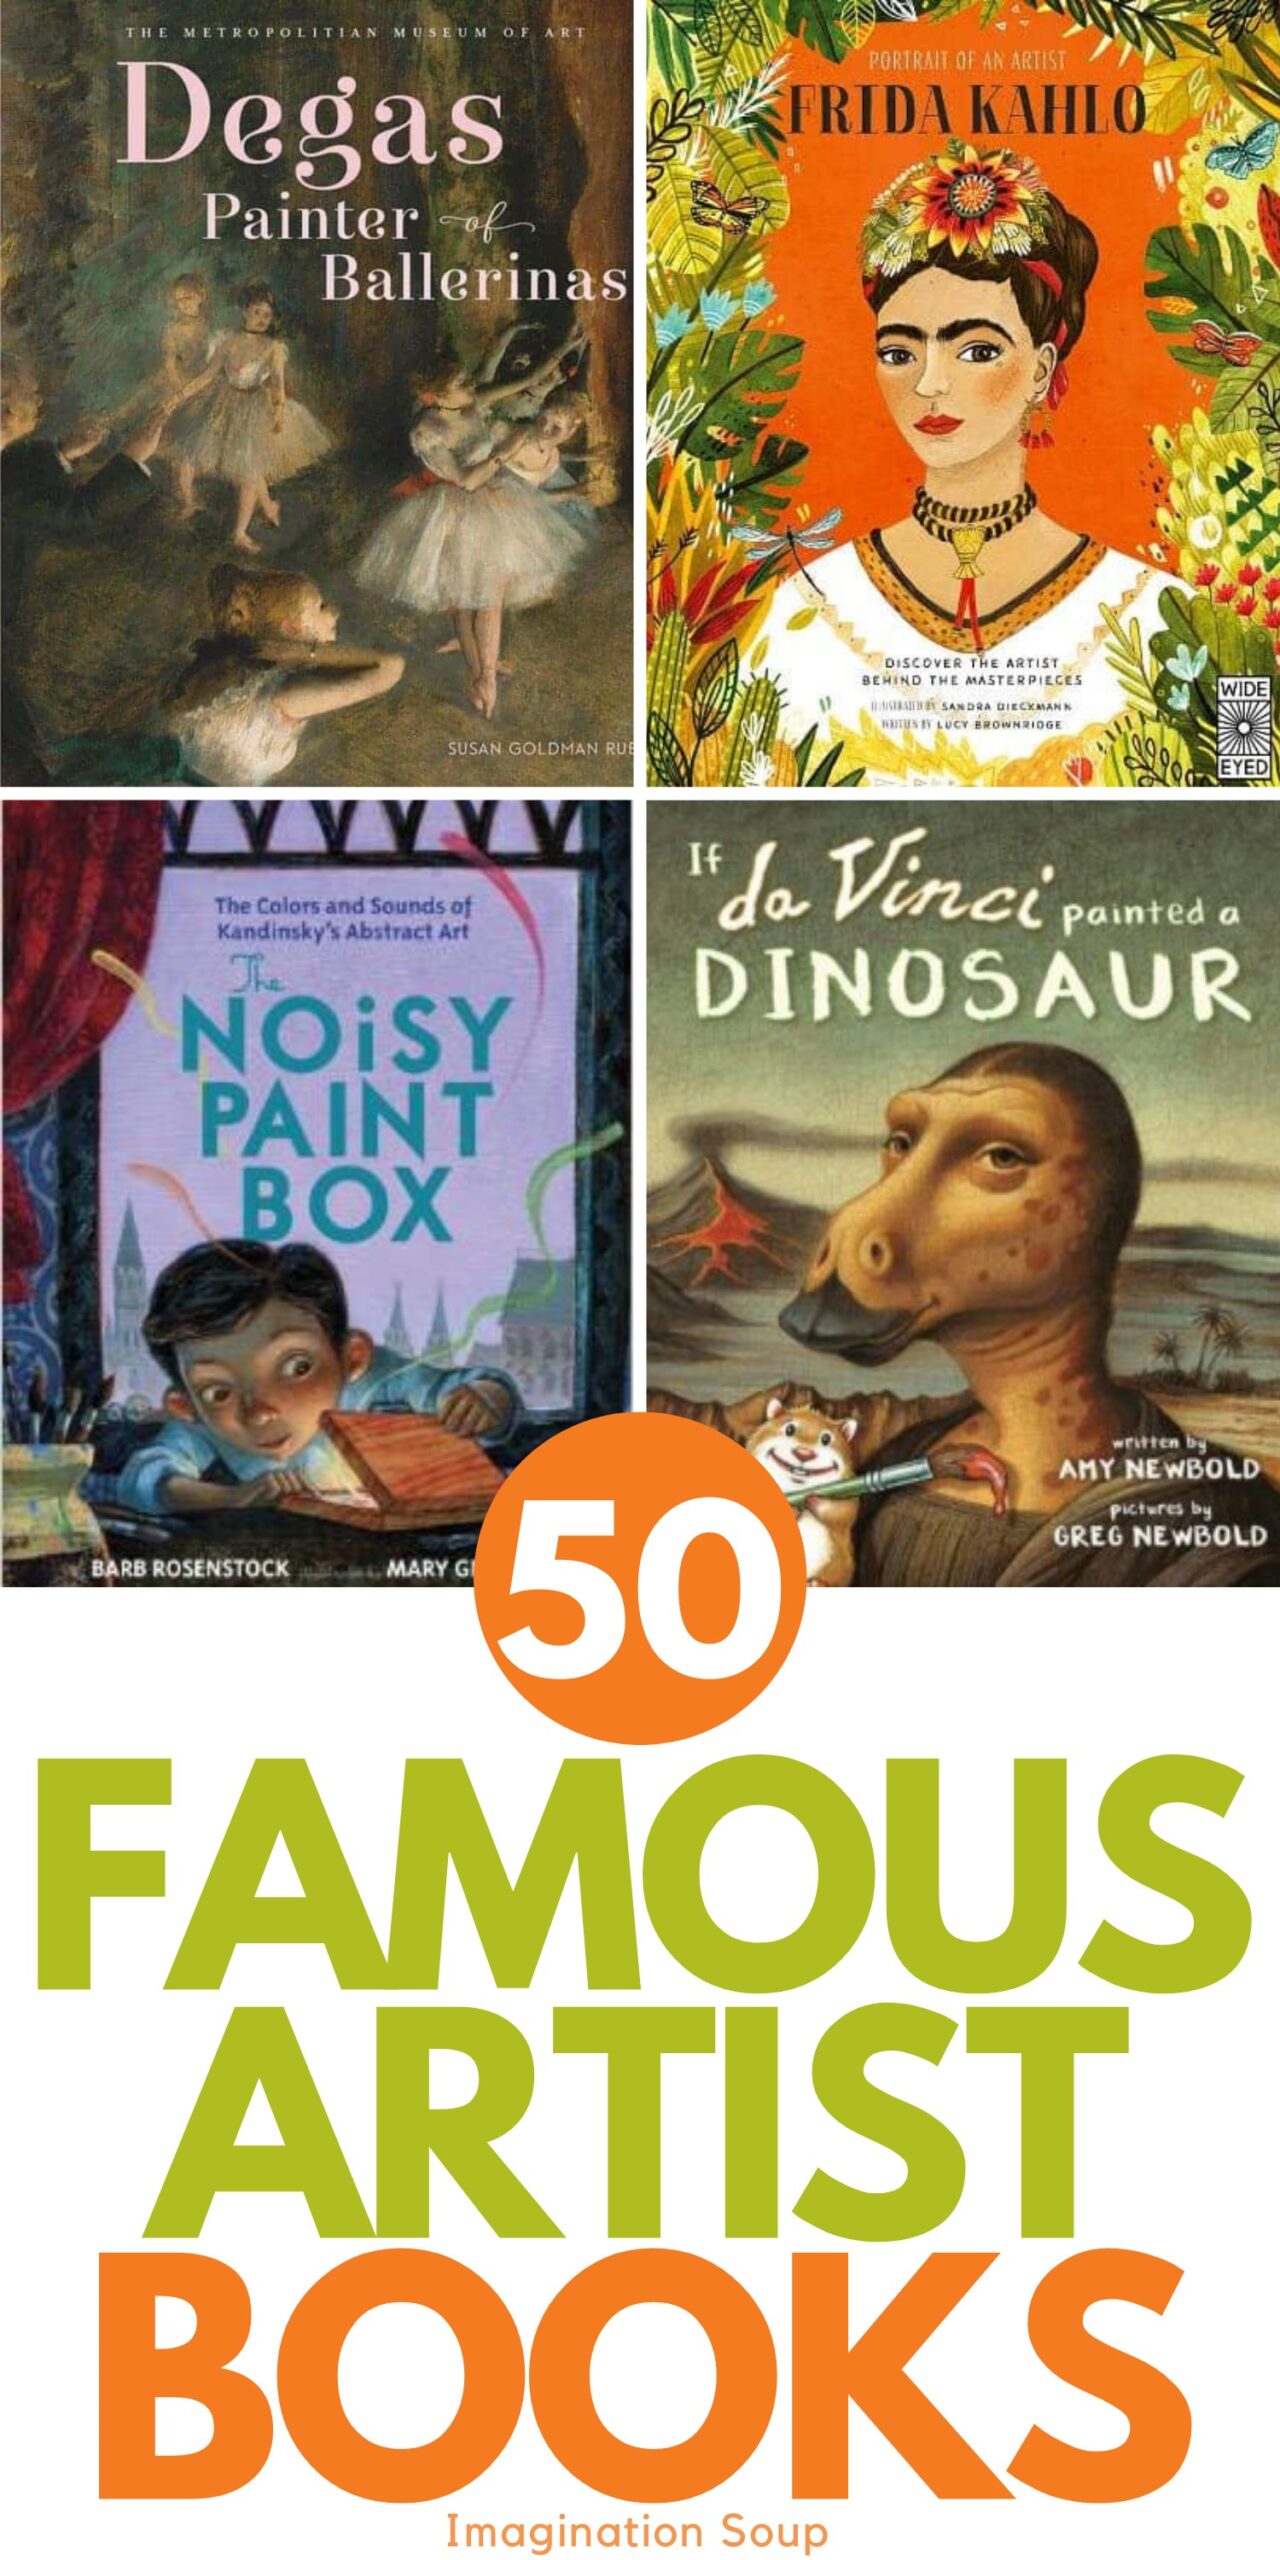 When kids learn about famous artists in picture books and narrative nonfiction stories, it helps readers remember the famous artists in a deeper way. Why? Because stories help us remember information, giving the artists a place in our background knowledge attached to a story.